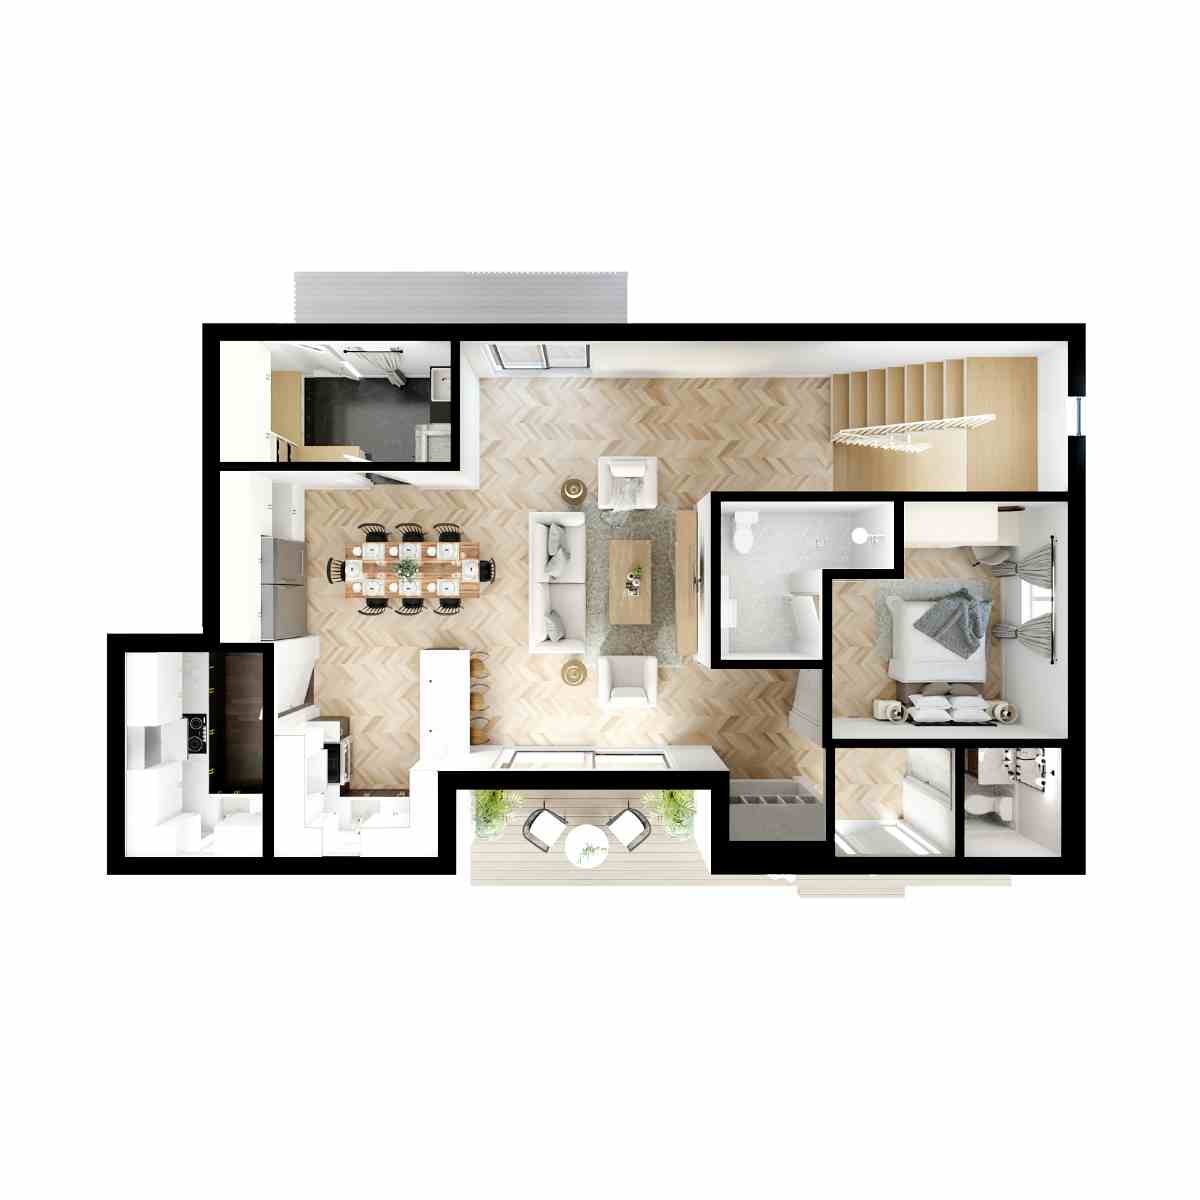 3D Floor Plan with finishes, flooring, and furniture